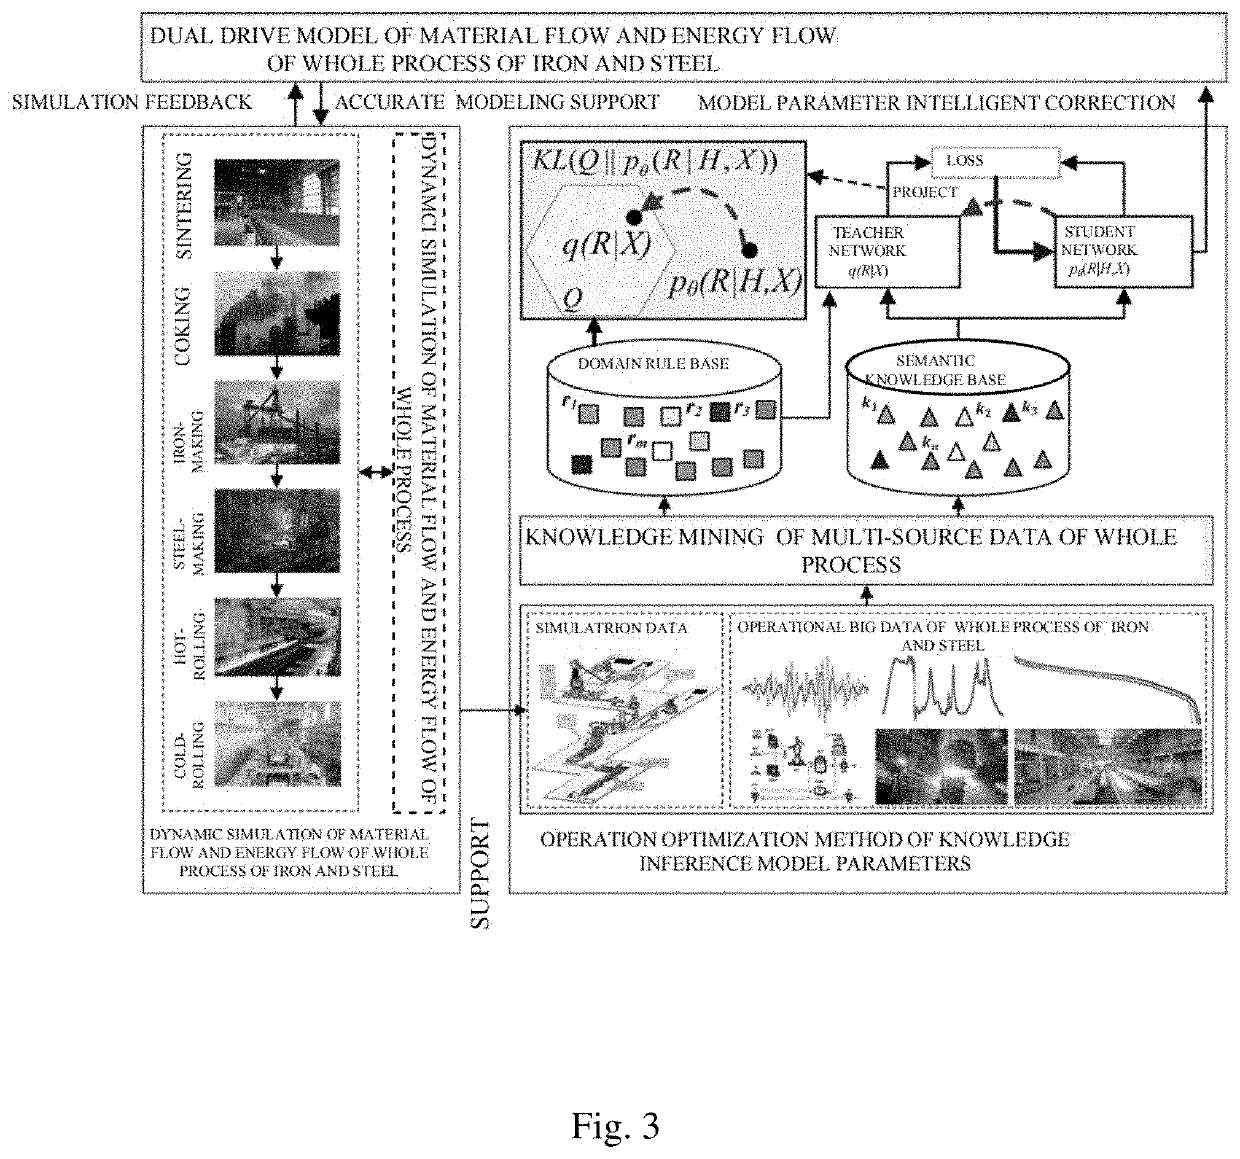 Optimization decision-making method of industrial process fusing domain knowledge and multi-source data